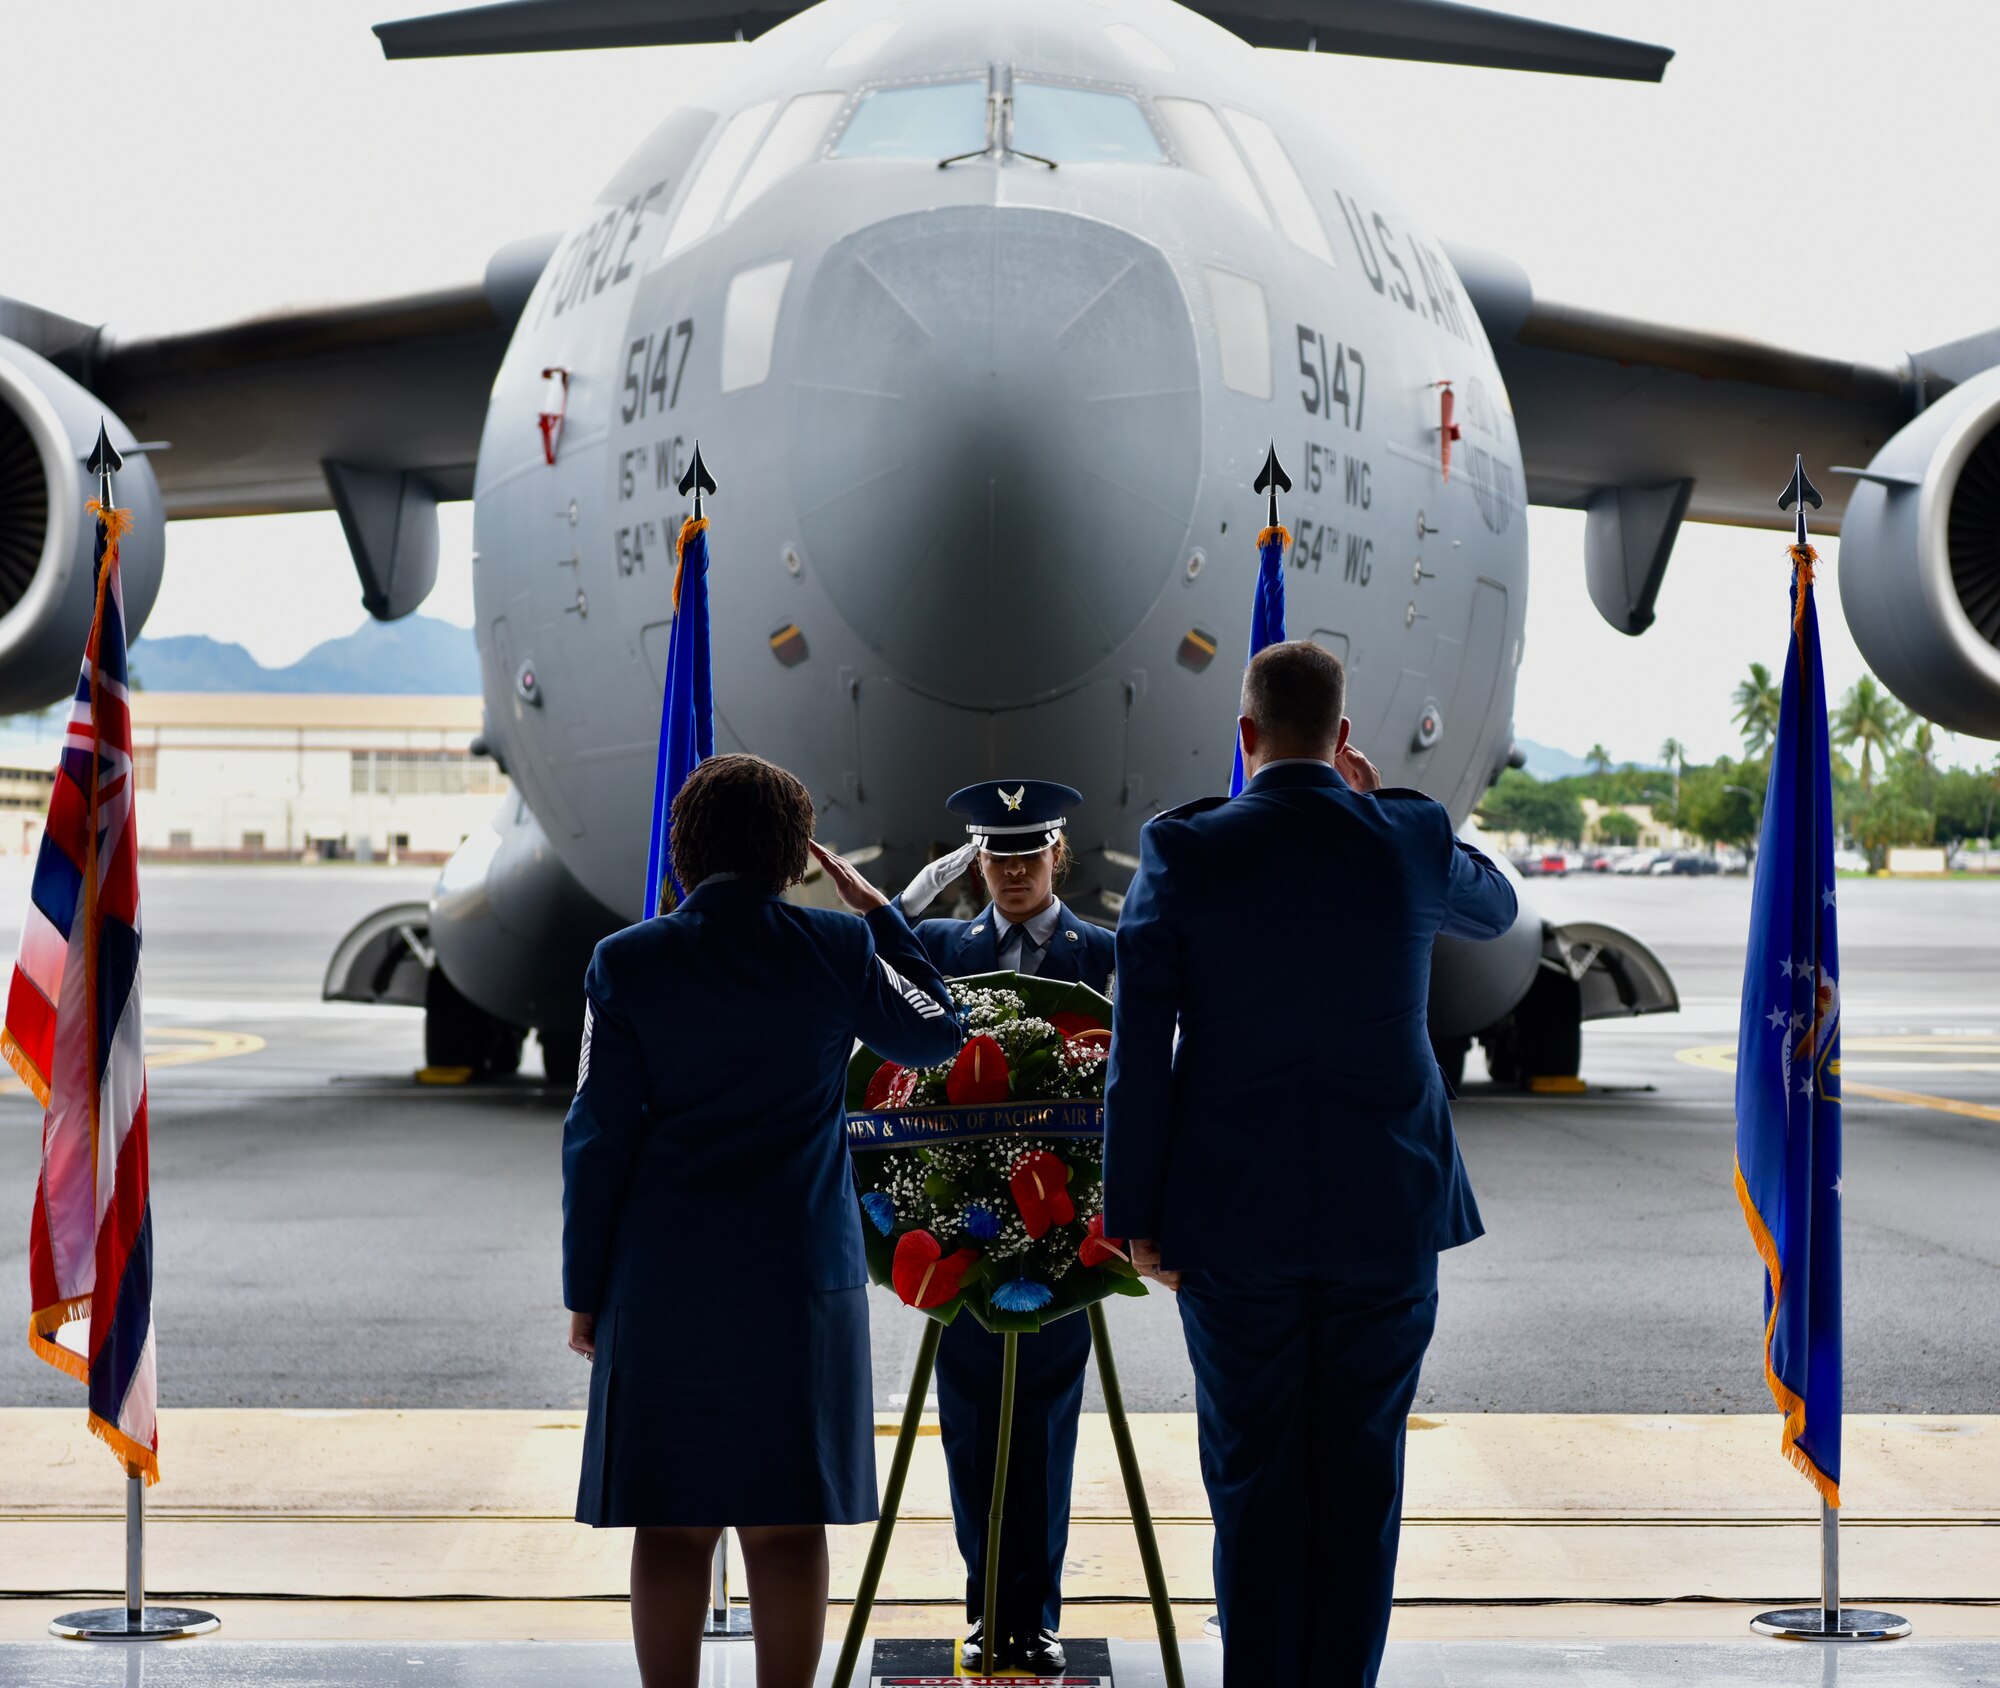 Col. Daniel Dobbels, 15th Wing commander, and Chief Master Sgt. Sheronne King, 15 WG command chief, salute a wreath presented at the December 7th Remembrance Ceremony at Joint Base Pearl Harbor-Hickam, Hawaii, Dec. 7, 2021. This year marked the 80th anniversary of the attacks on Hickam Field and Pearl Harbor. (U.S. Air Force photo by 1st Lt. Benjamin Aronson)